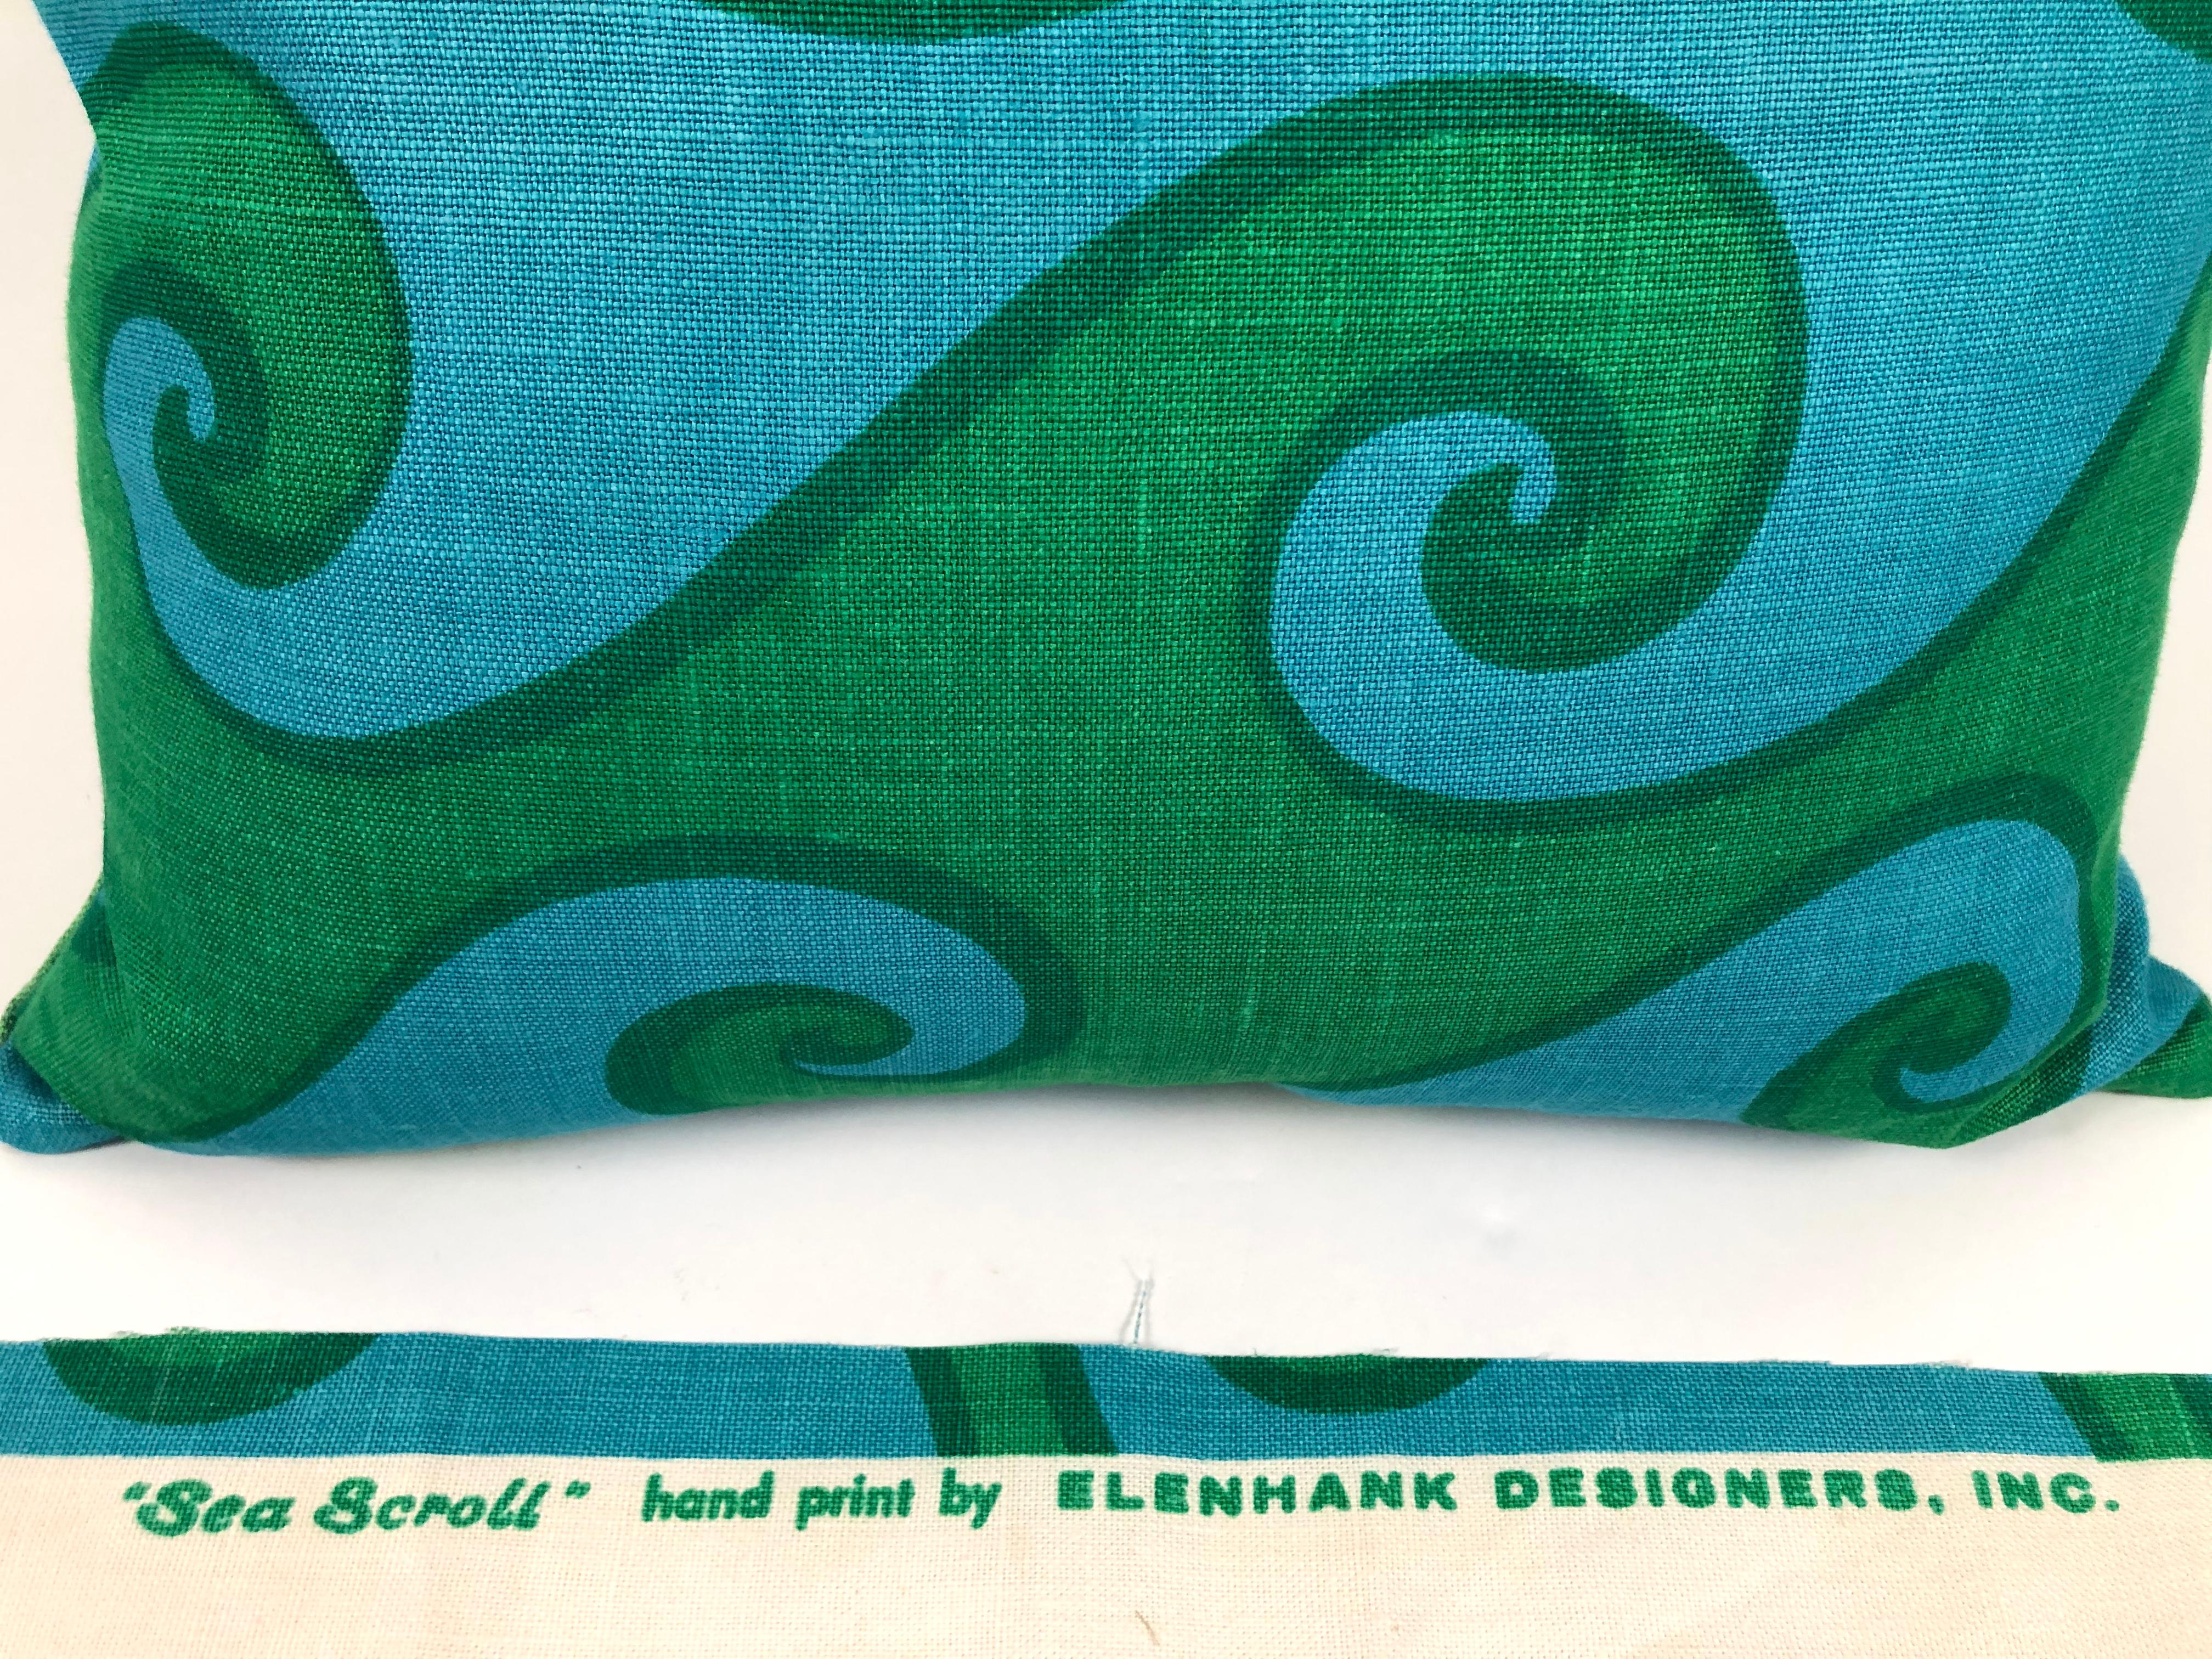 Mid-Century Modern Vintage Blue and Green Sea Scroll Pattern Pillow Hand Printed by Elenhank